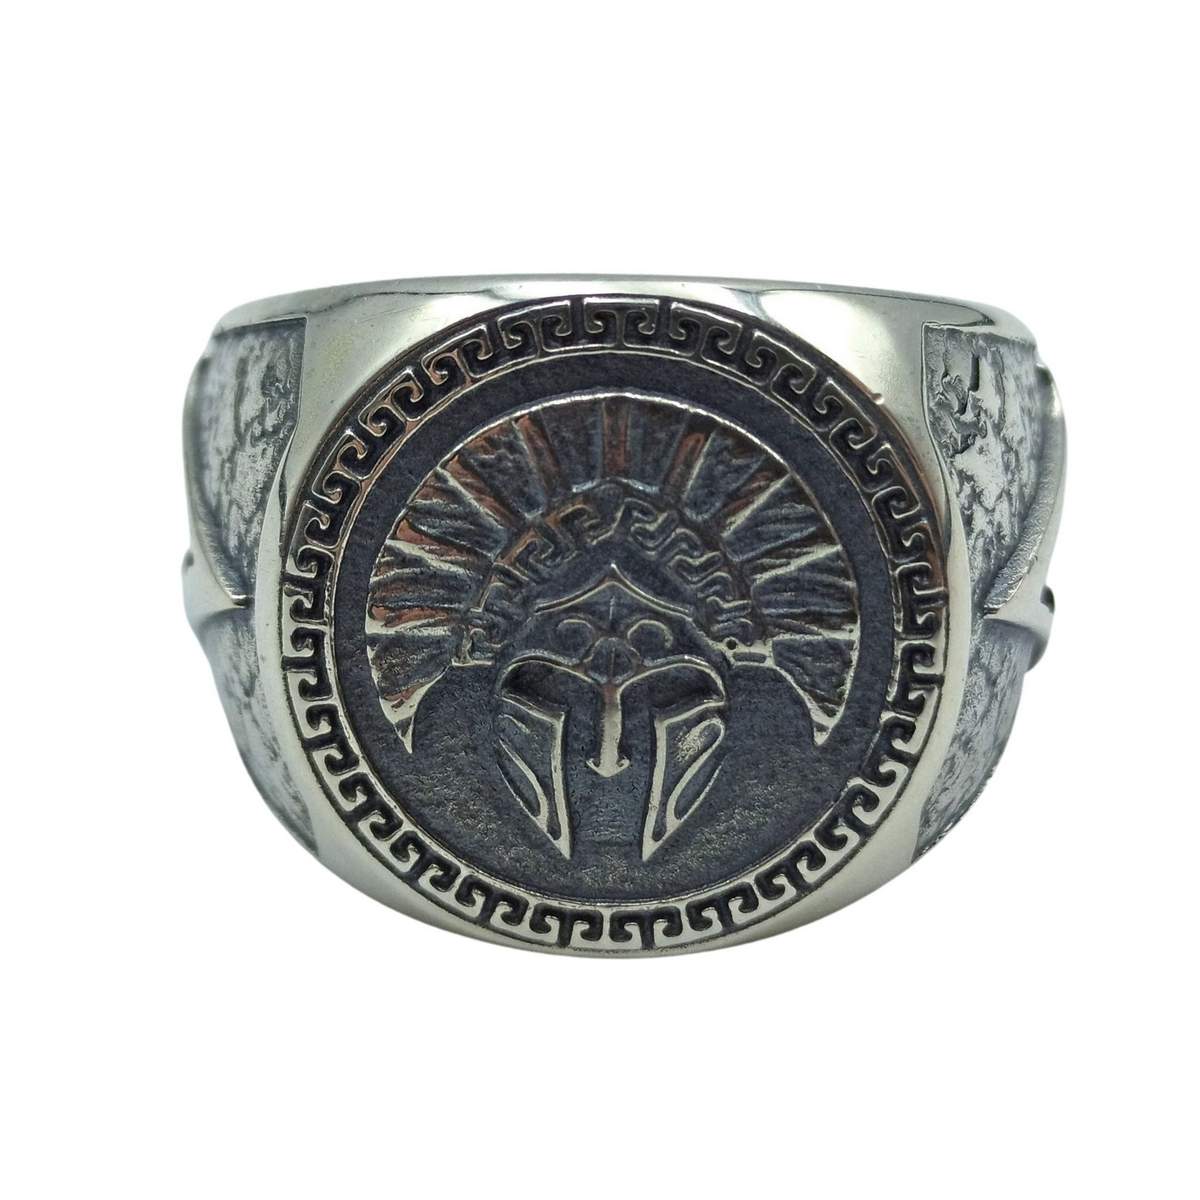 Thermopylae Band Ring | Spartan Helmet and Warrior Skull Ring | NightRider  Jewelry